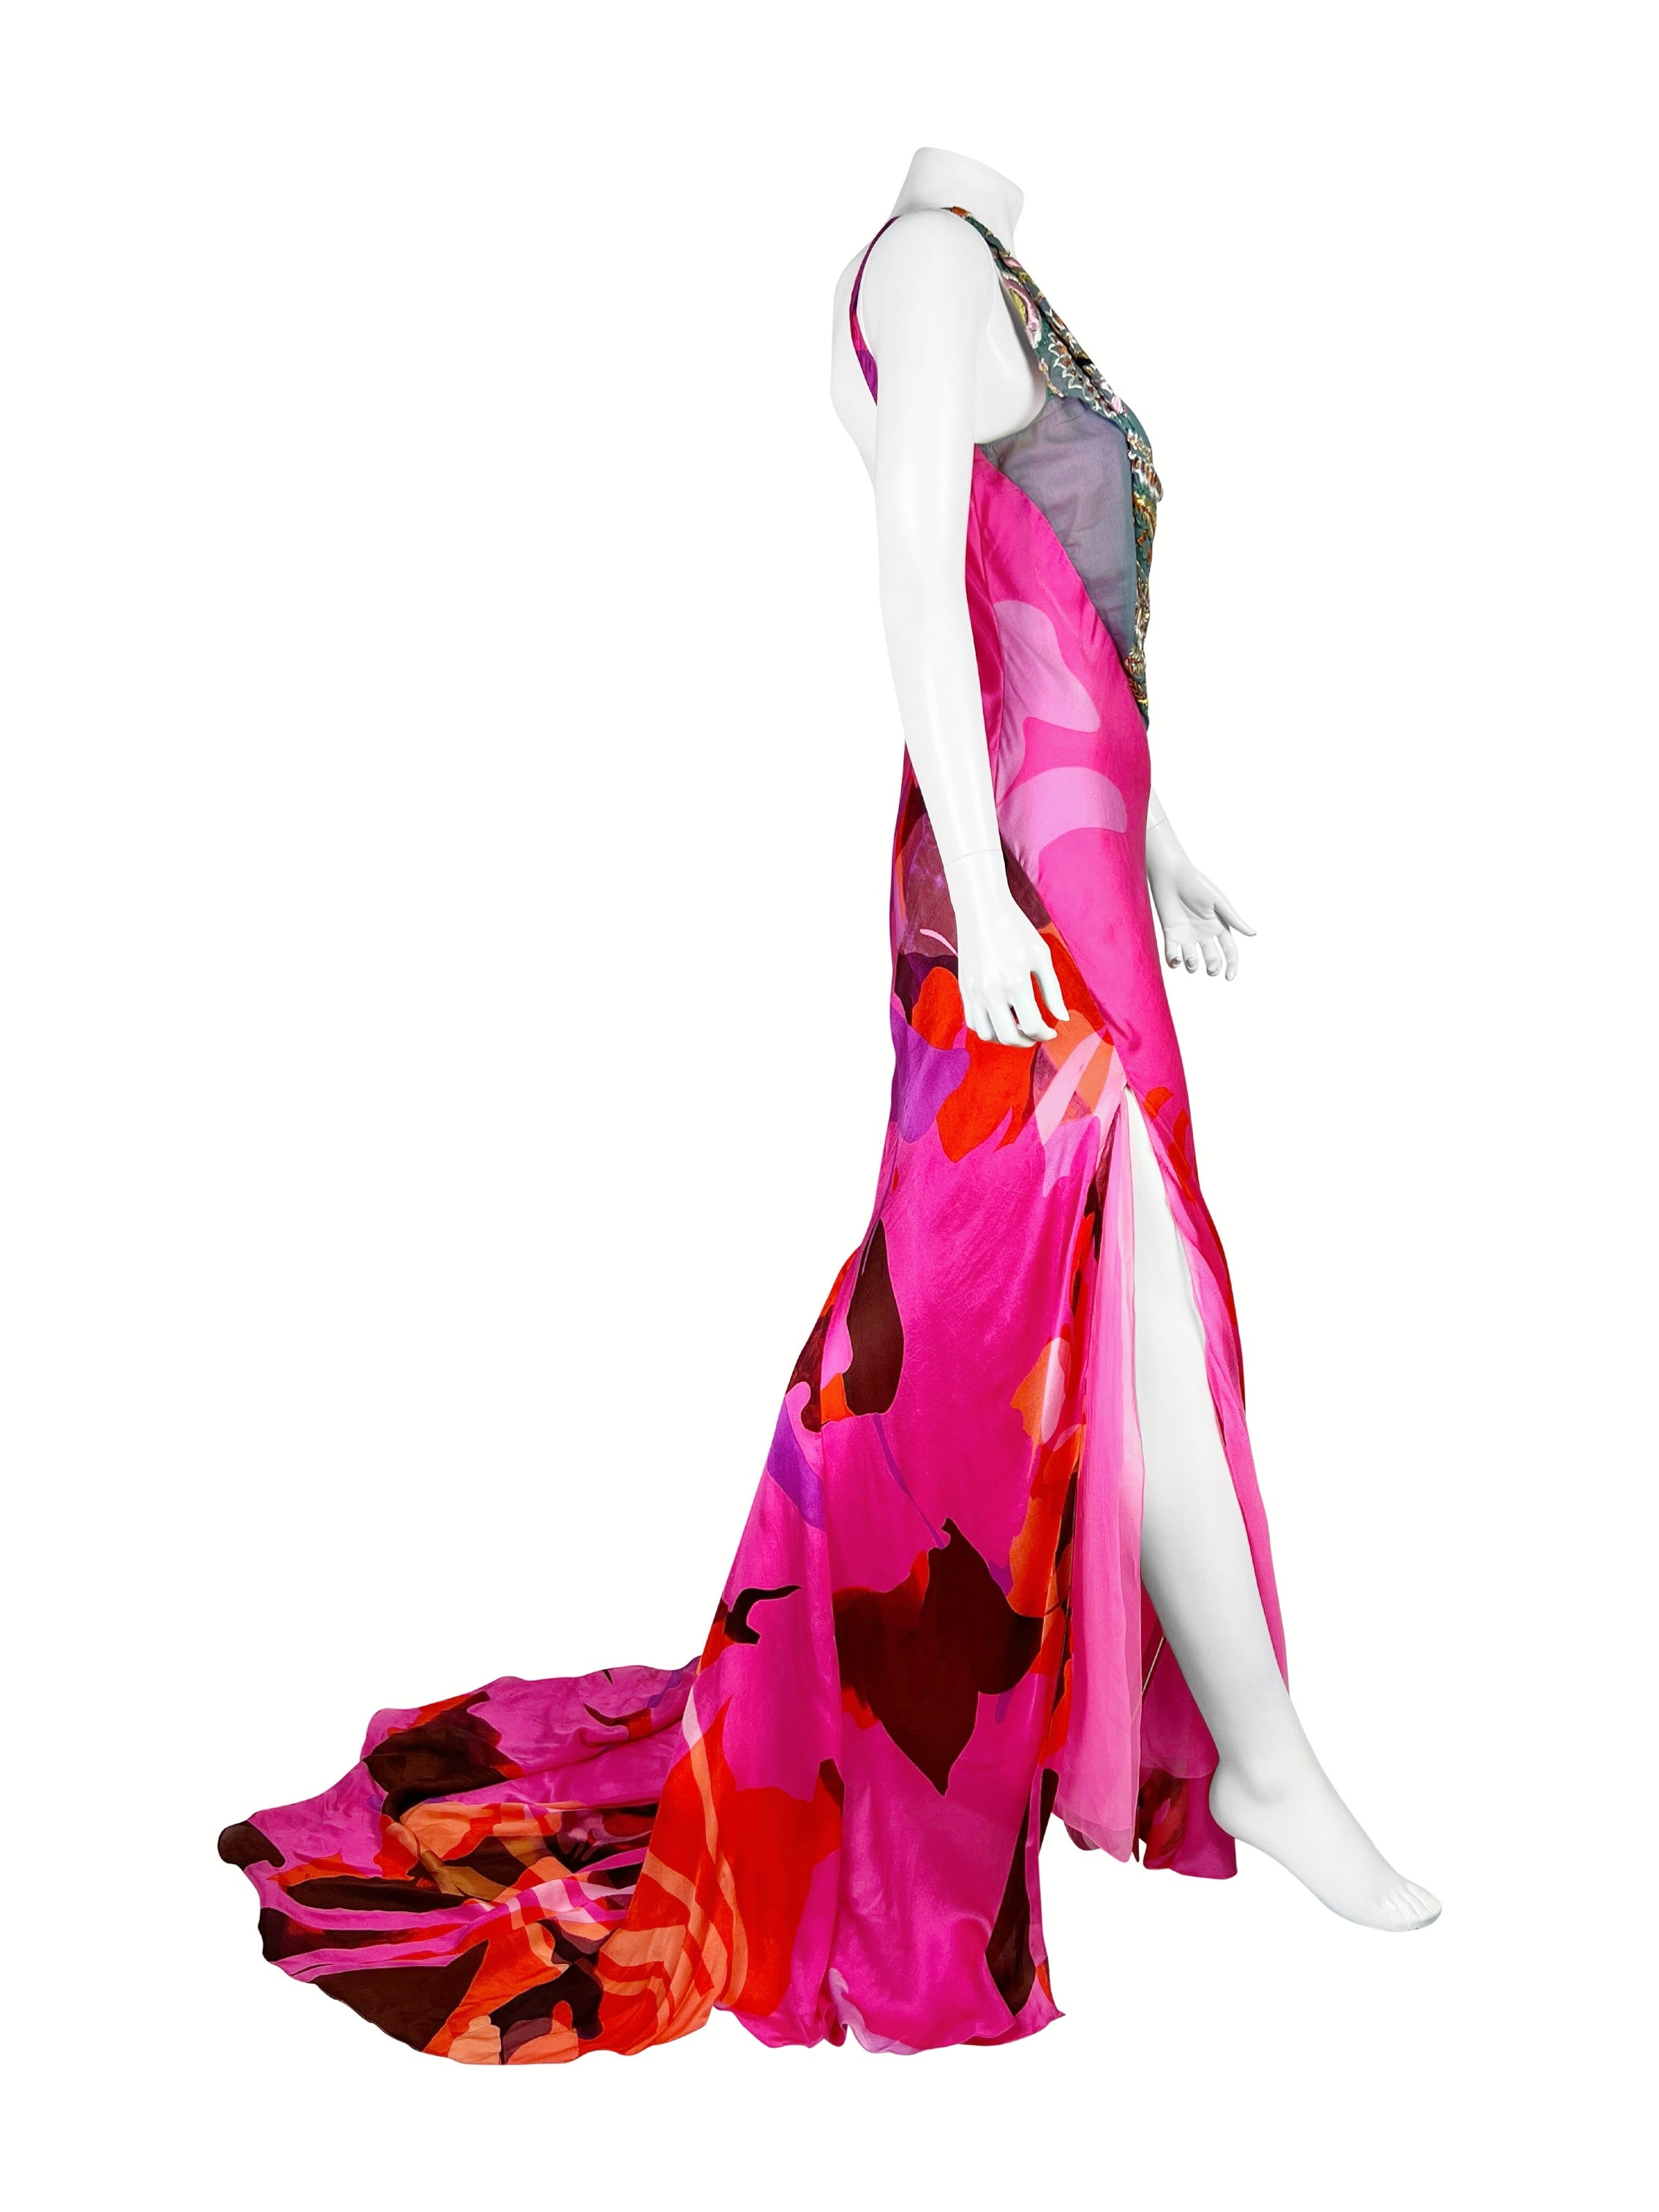 Christian Lacroix Spring 2003 Silk Gown